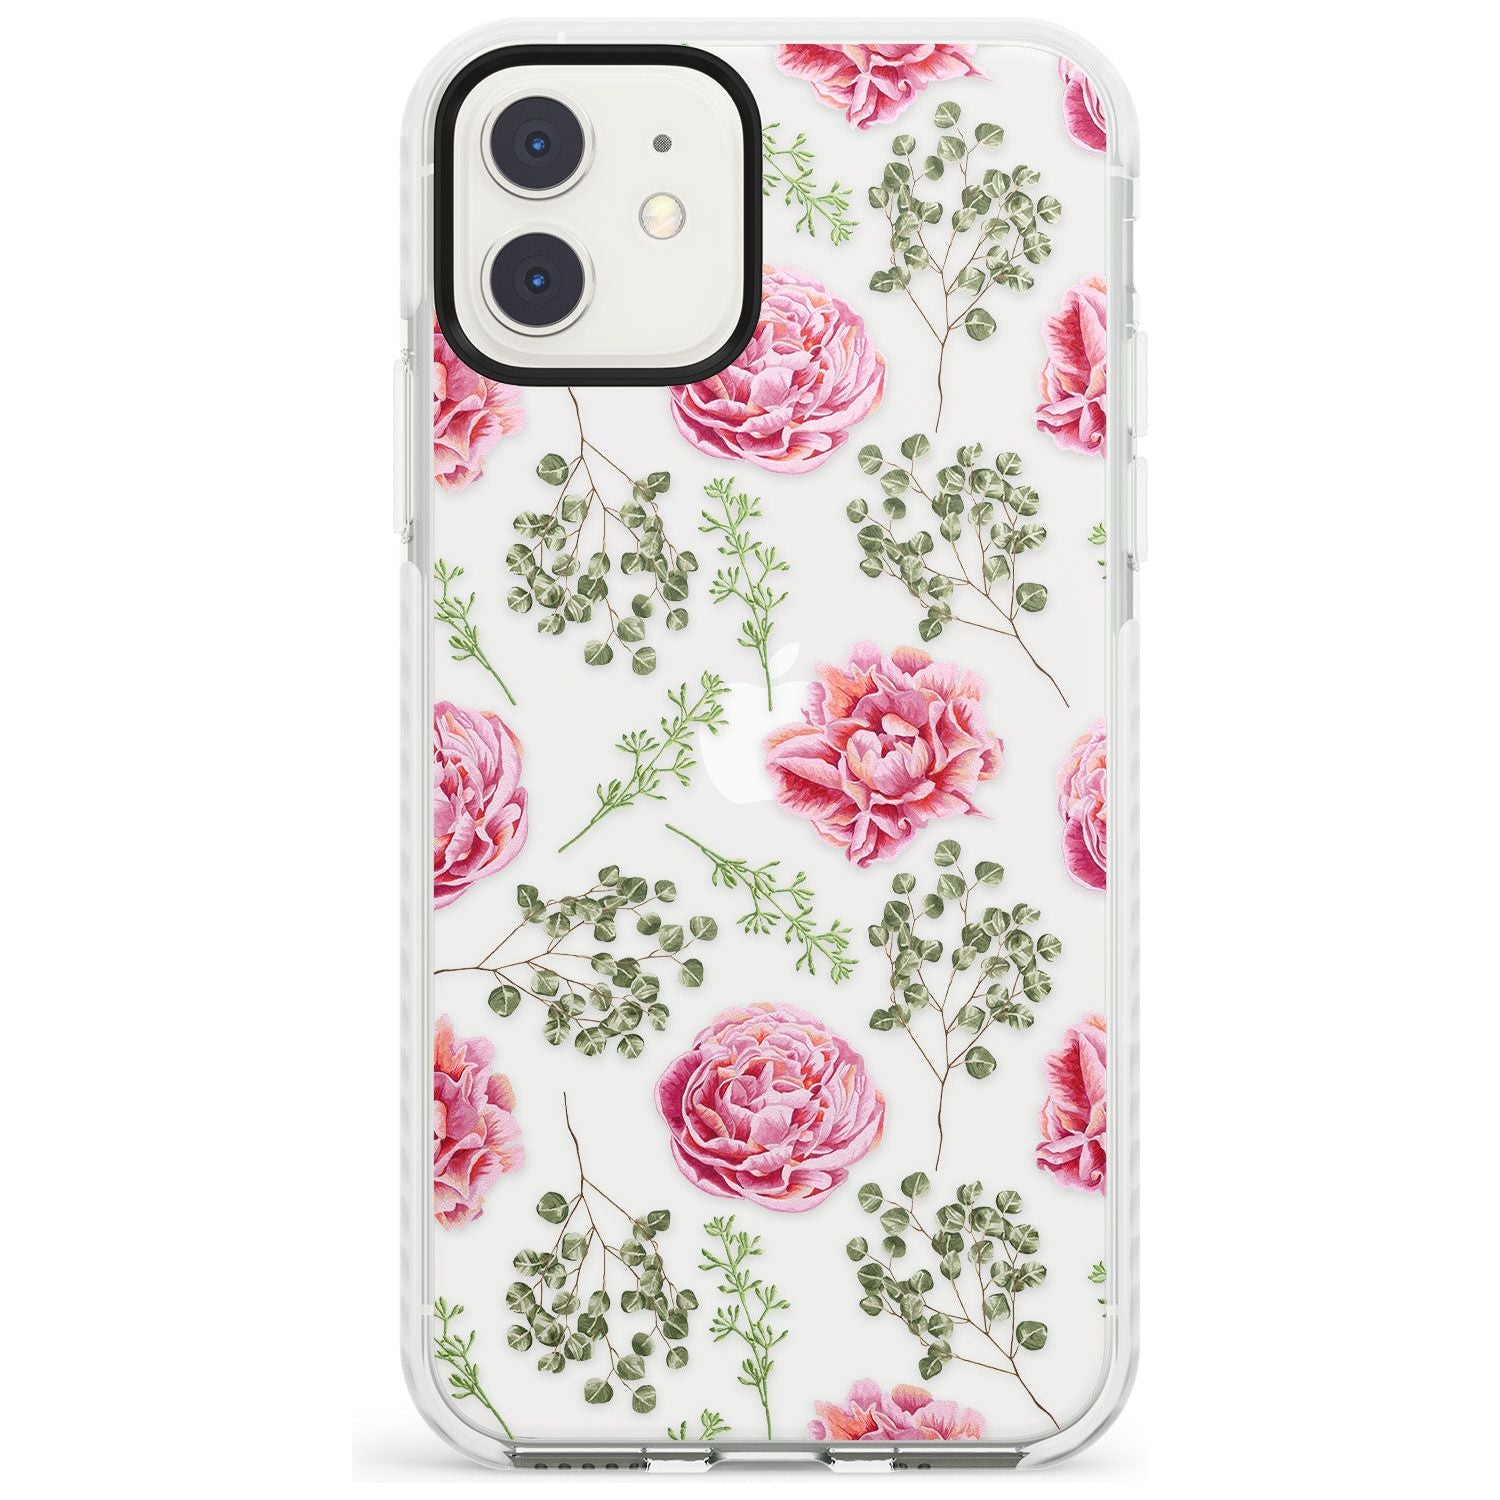 Roses & Eucalyptus Transparent Floral Impact Phone Case for iPhone 11